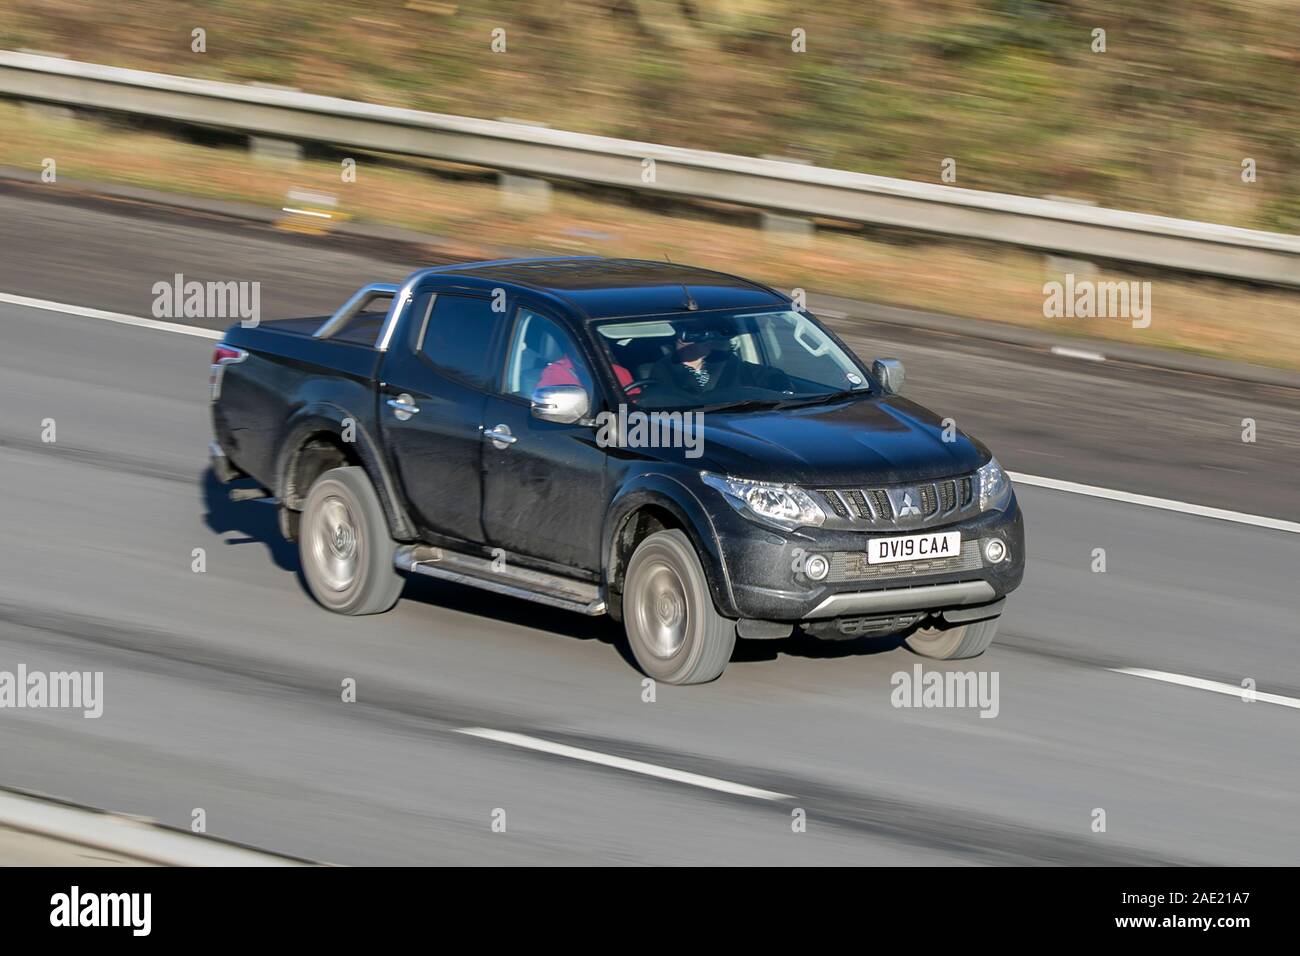 Blurred moving car Mitsubishi L200 Barbarian Di-D traveling at speed on the M61 motorway Slow camera shutter speed vehicle movement Stock Photo